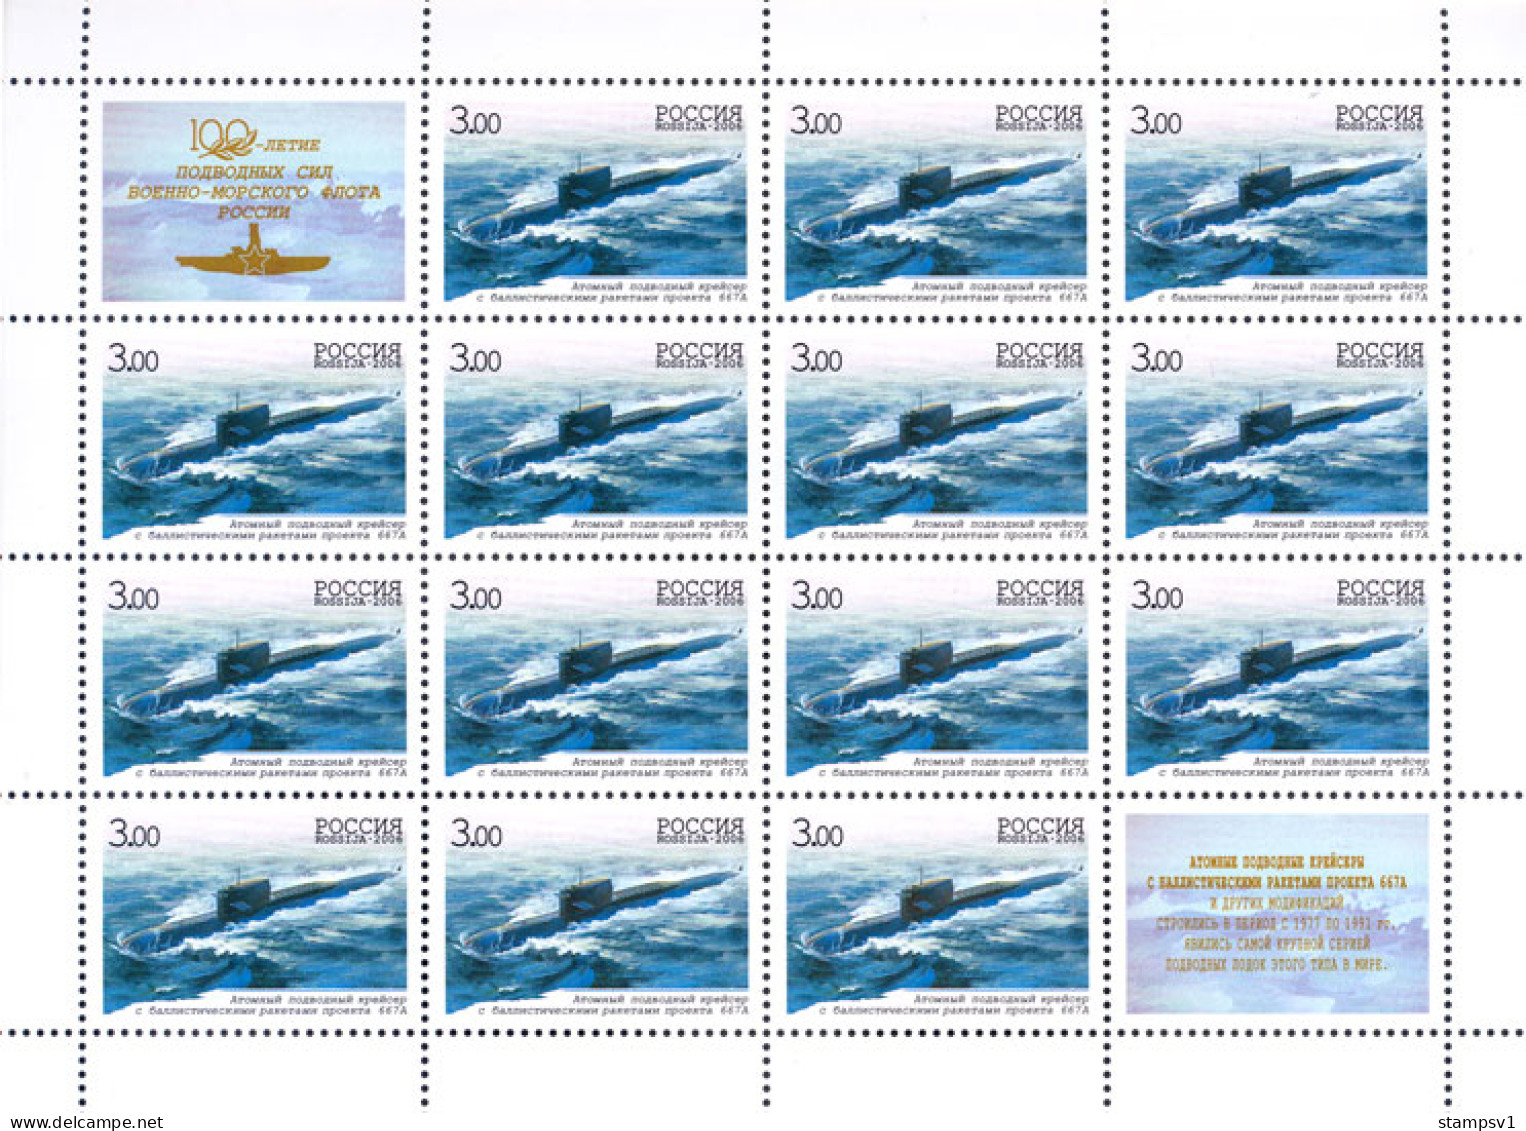 Russia 2006 The 100th Anniversary Of The Russian Navy Underwater Forces. Mi 1311-14 4 Klb - Duikboten